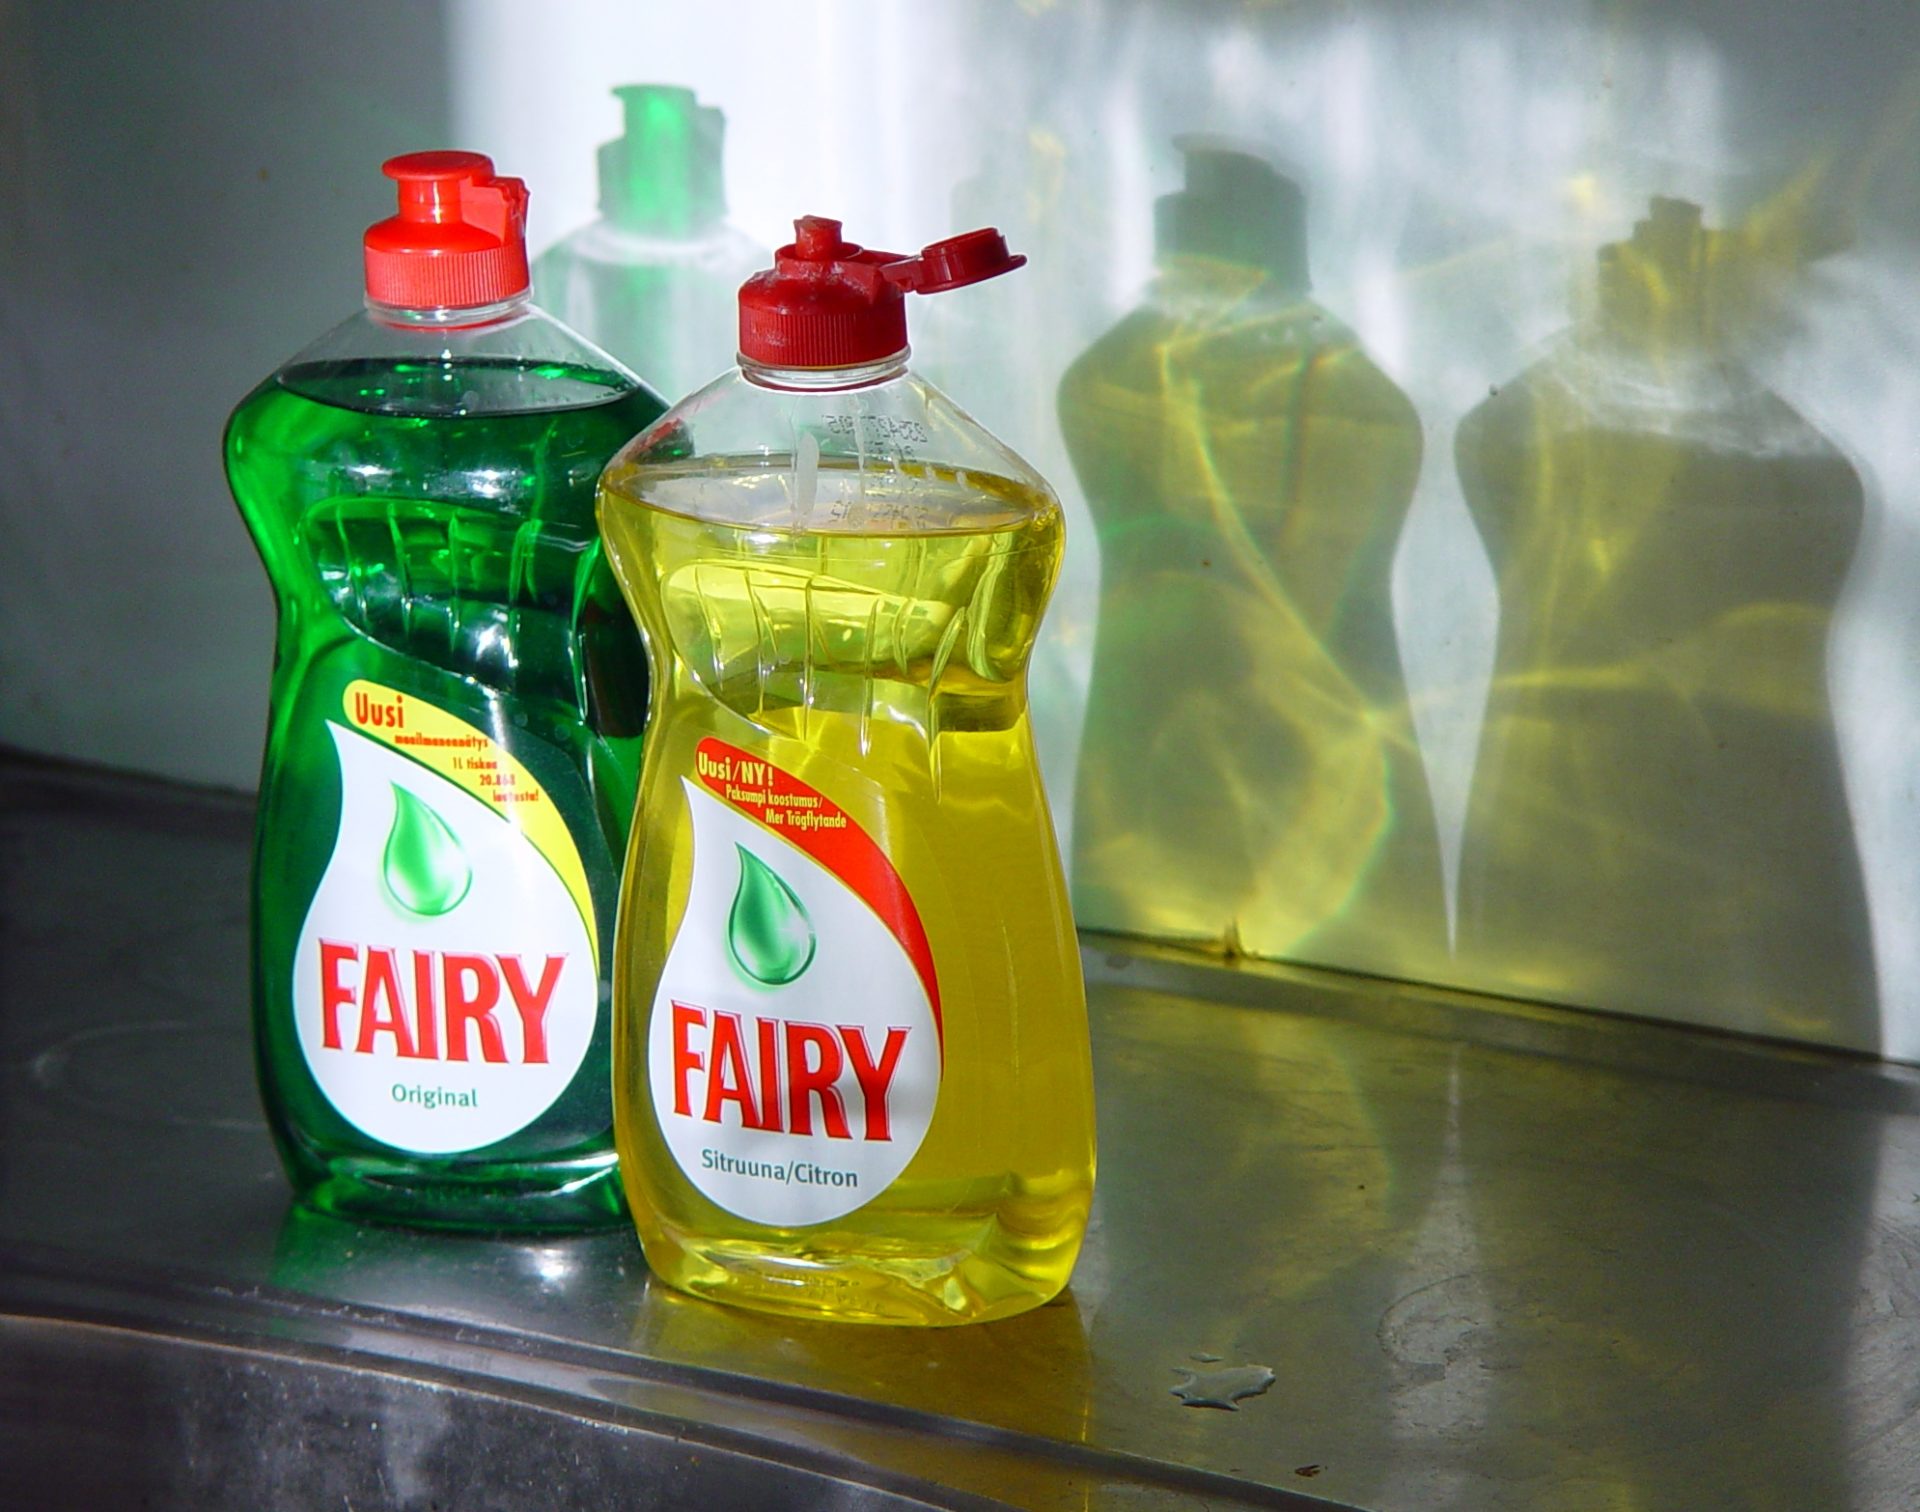 Two bottles of Fairy brand washing-up liquid